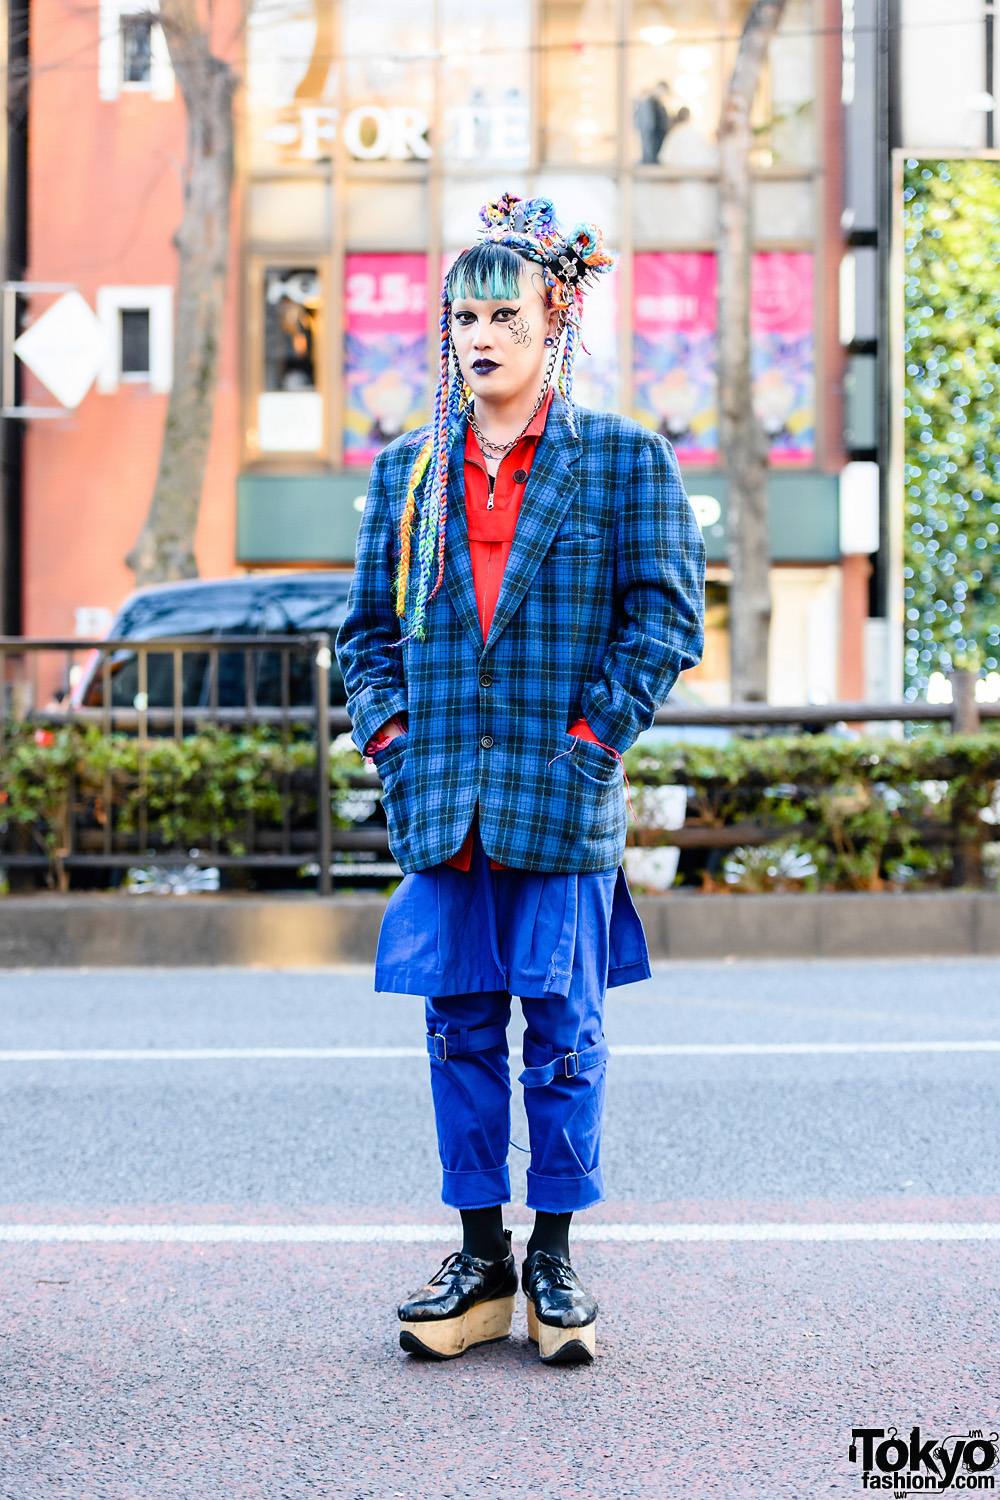 Harajuku Style w/ Multicolored Braided Buns, Spiked Hair Cuffs, Plaid Blazer, Strap Pants w/ Skirt Panel & Vivienne Westwood Rocking Horse Shoes